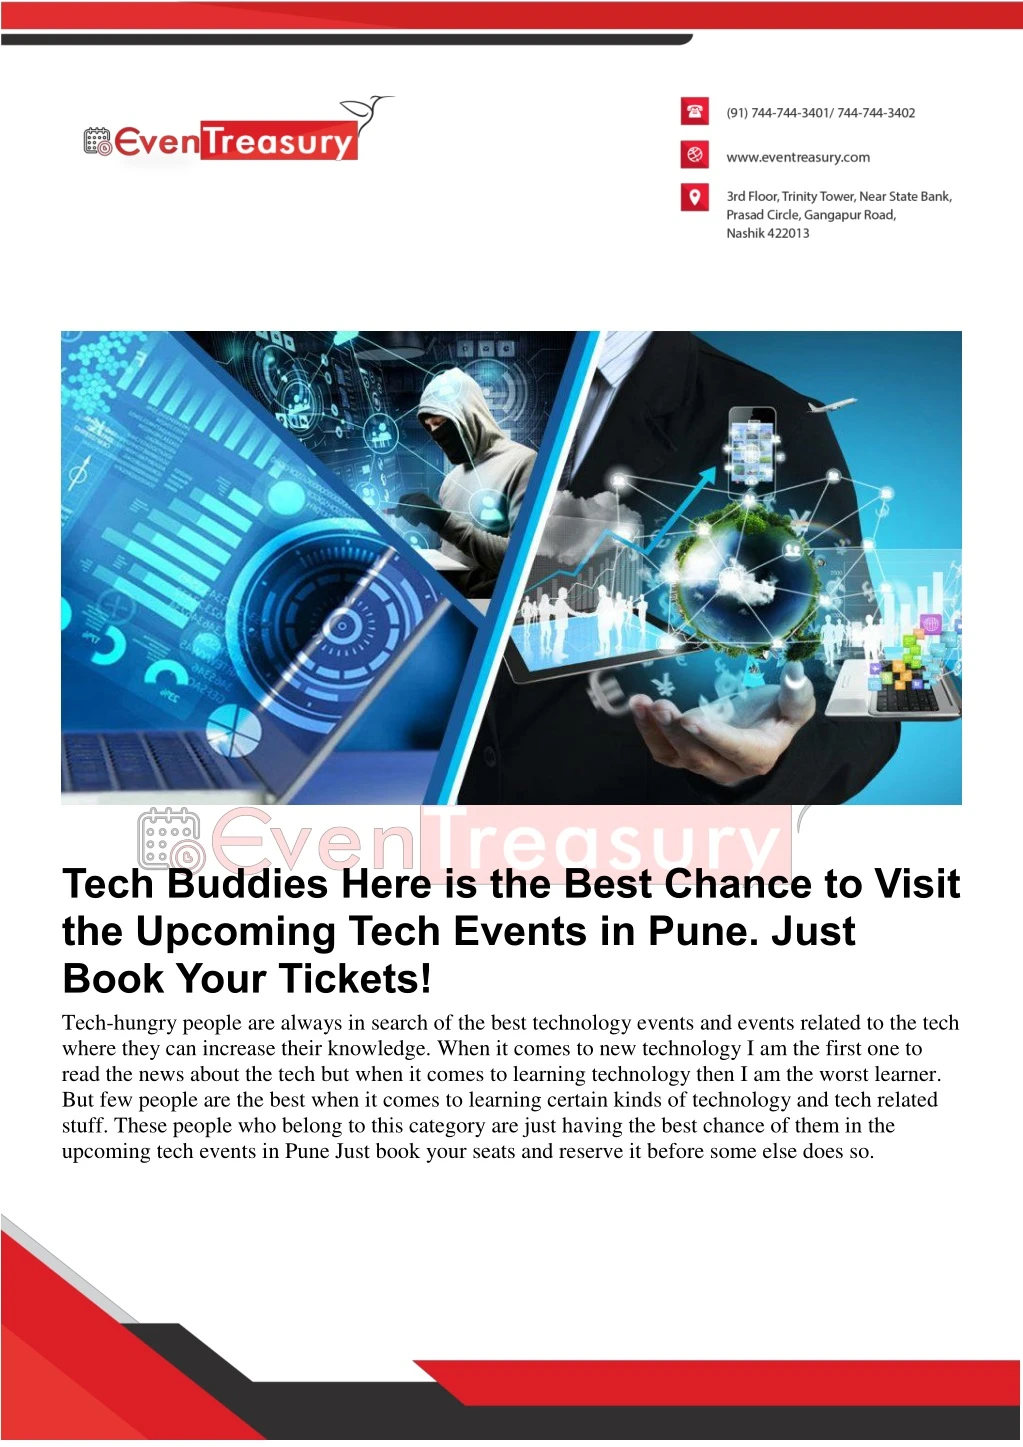 tech buddies here is the best chance to visit